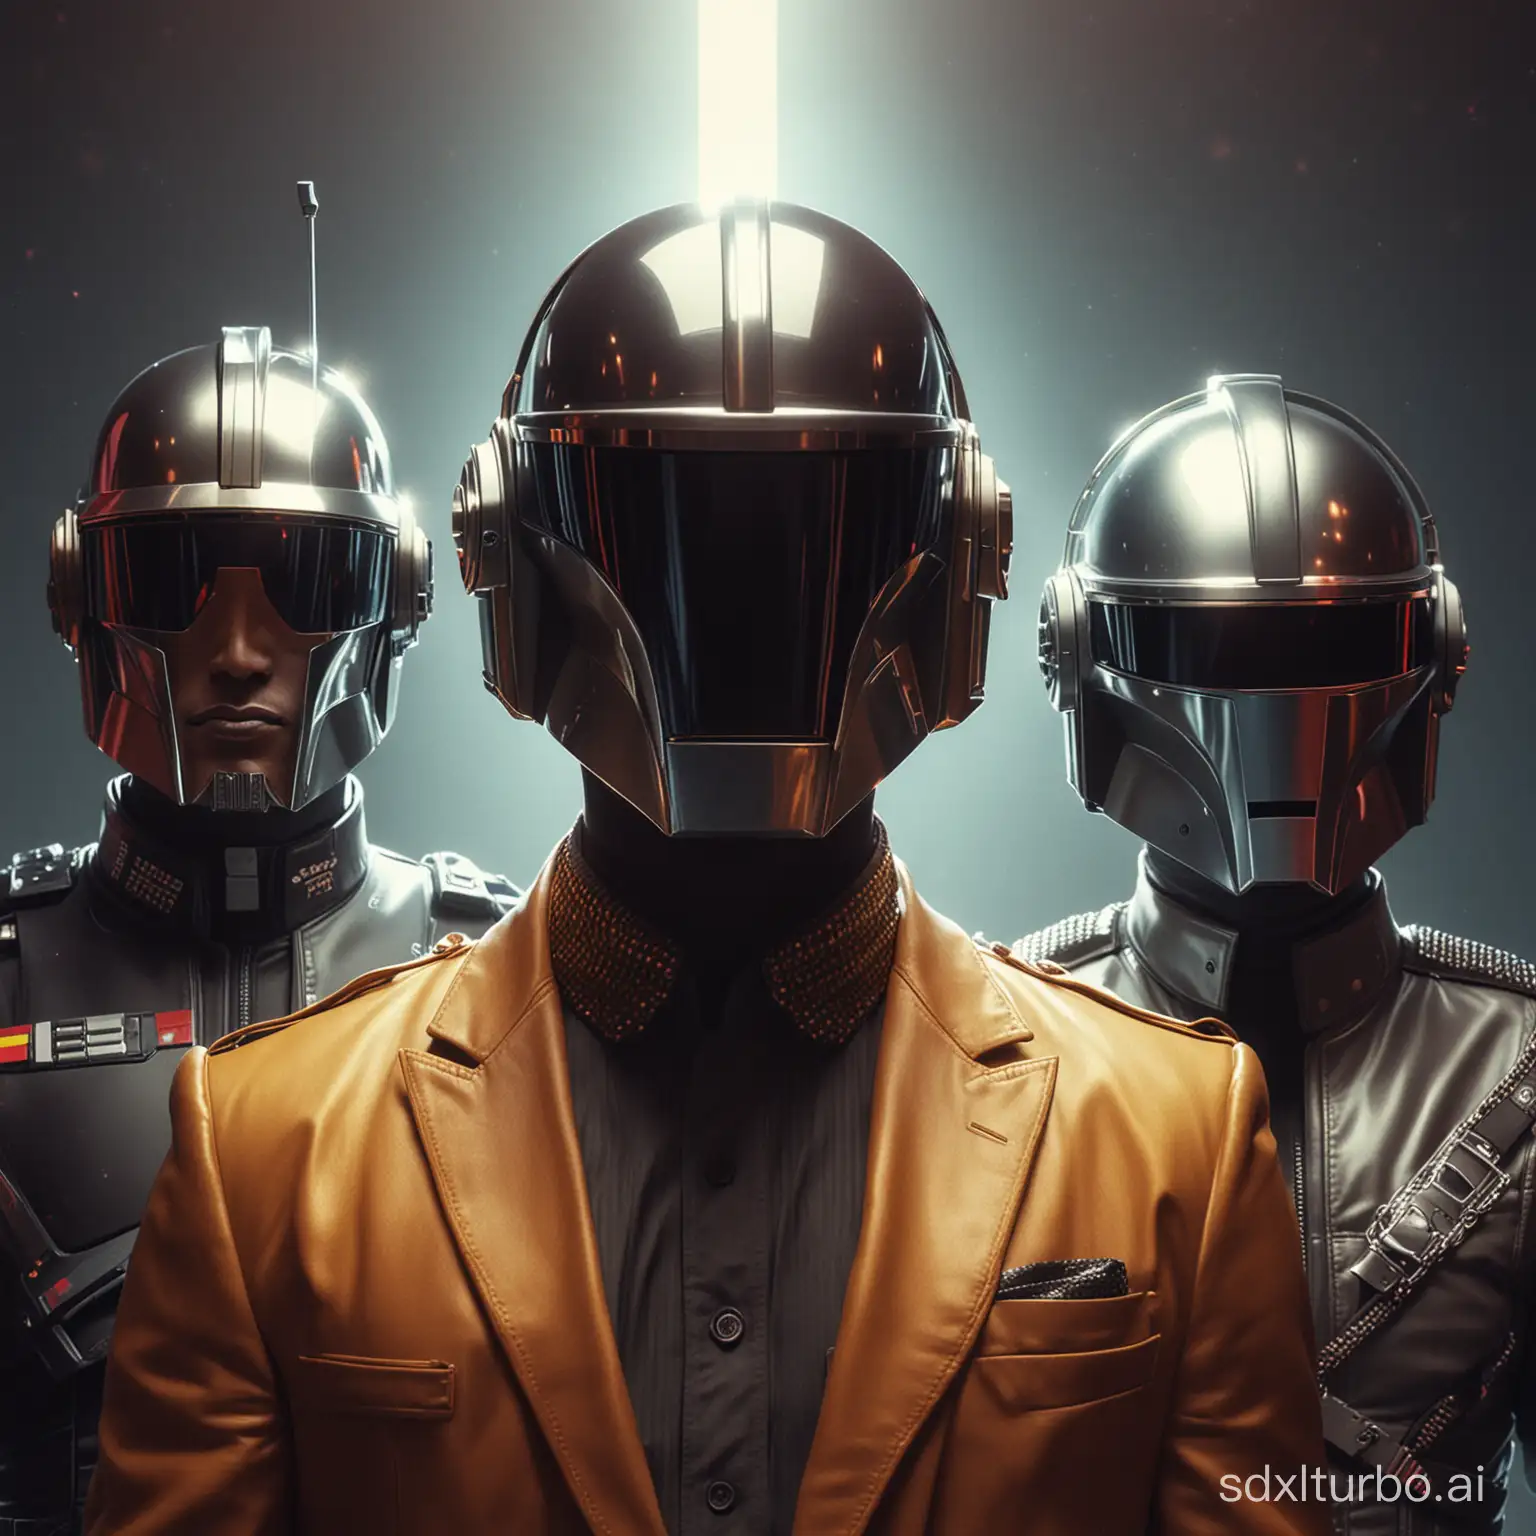 Max Headroom and Mandalorian as Daft Punk with Pharrell Williams, psychedelic, lens flare, 